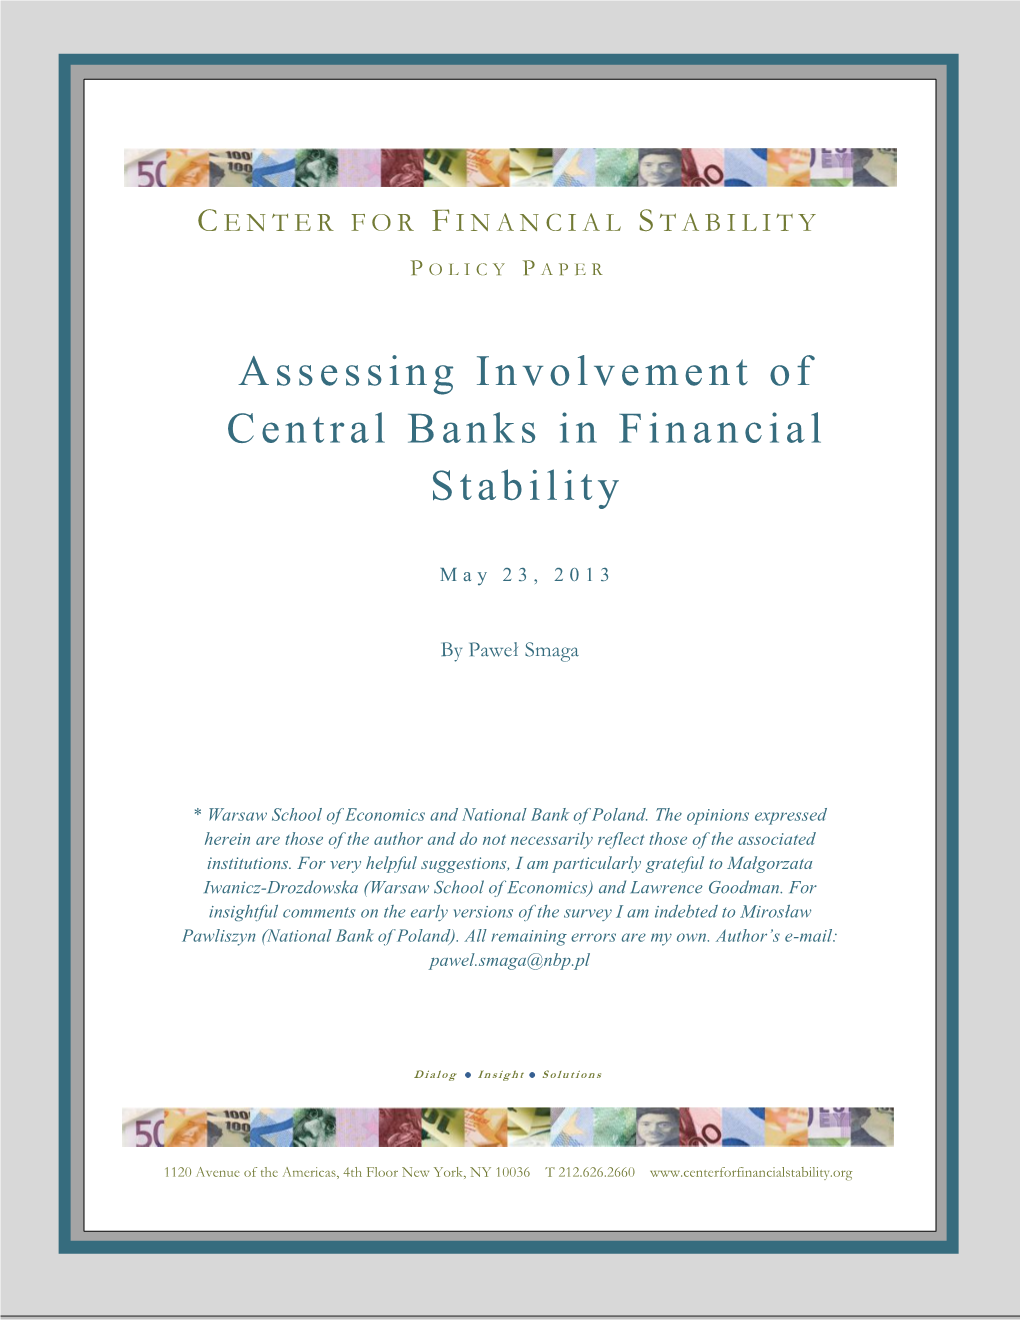 Assessing Involvement of Central Banks in Financial Stability